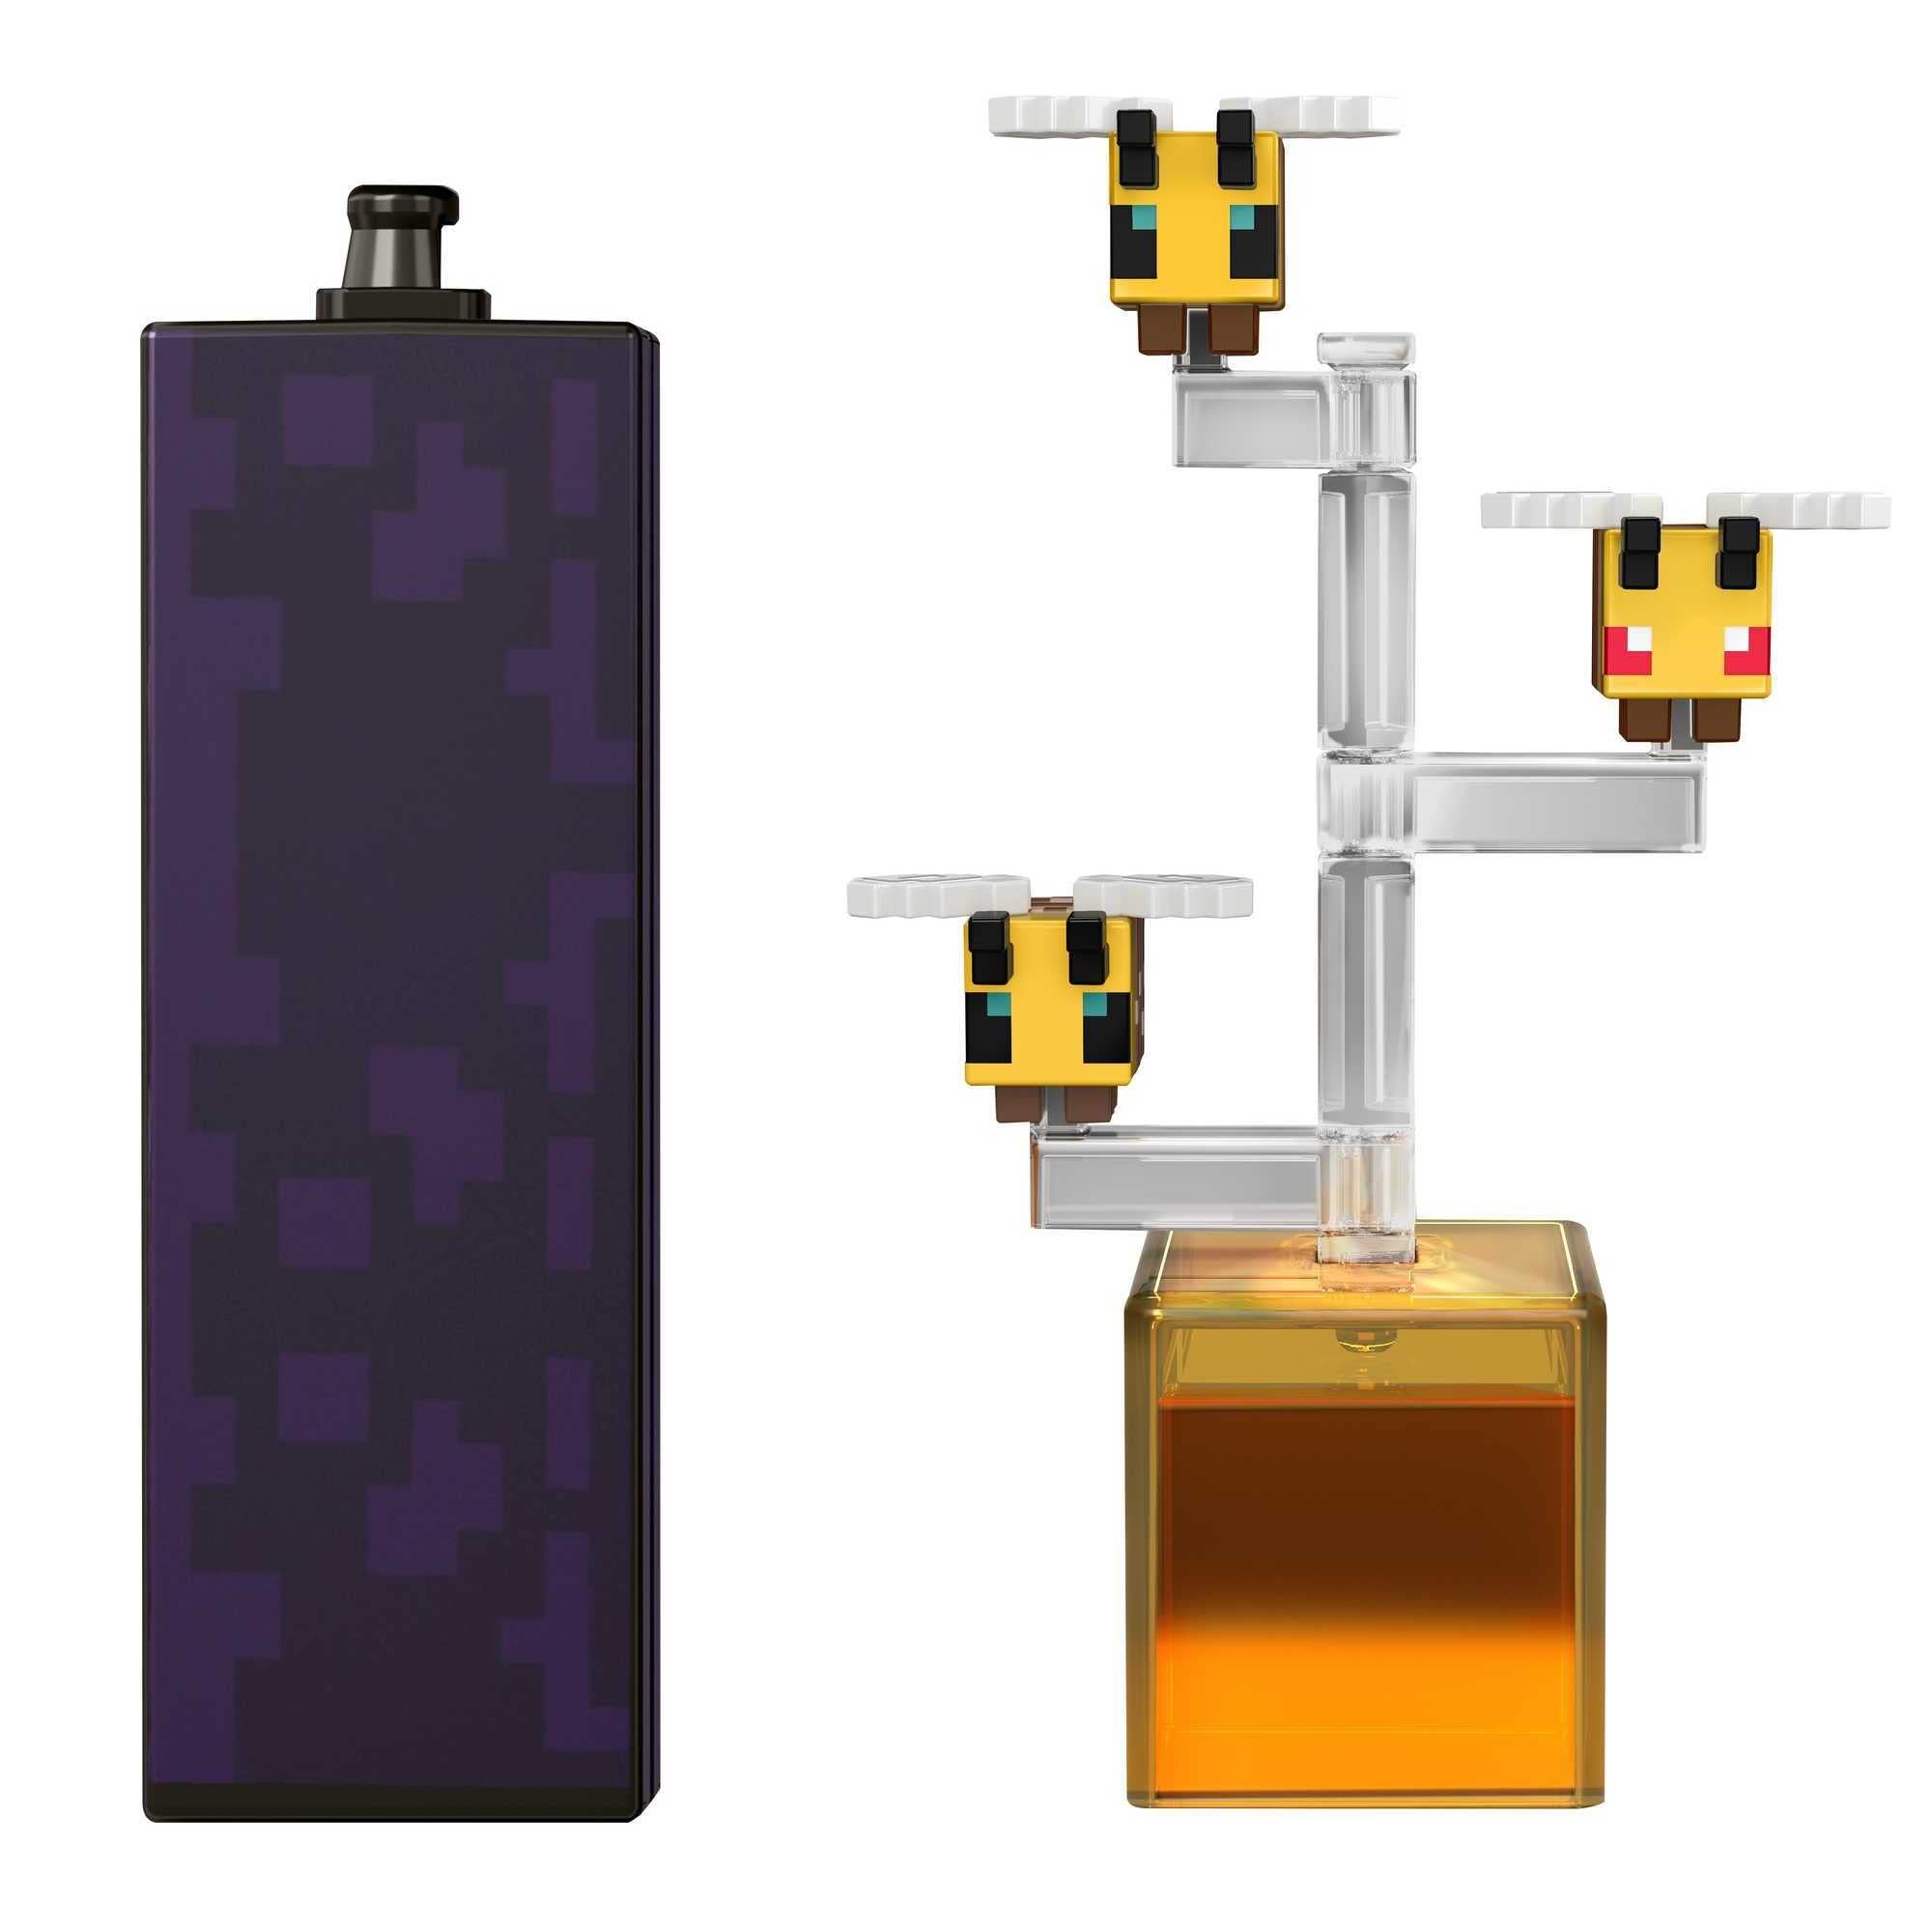 Minecraft 3.25-in Bees Action Figure w/1 Portal Piece & 1 Accessory